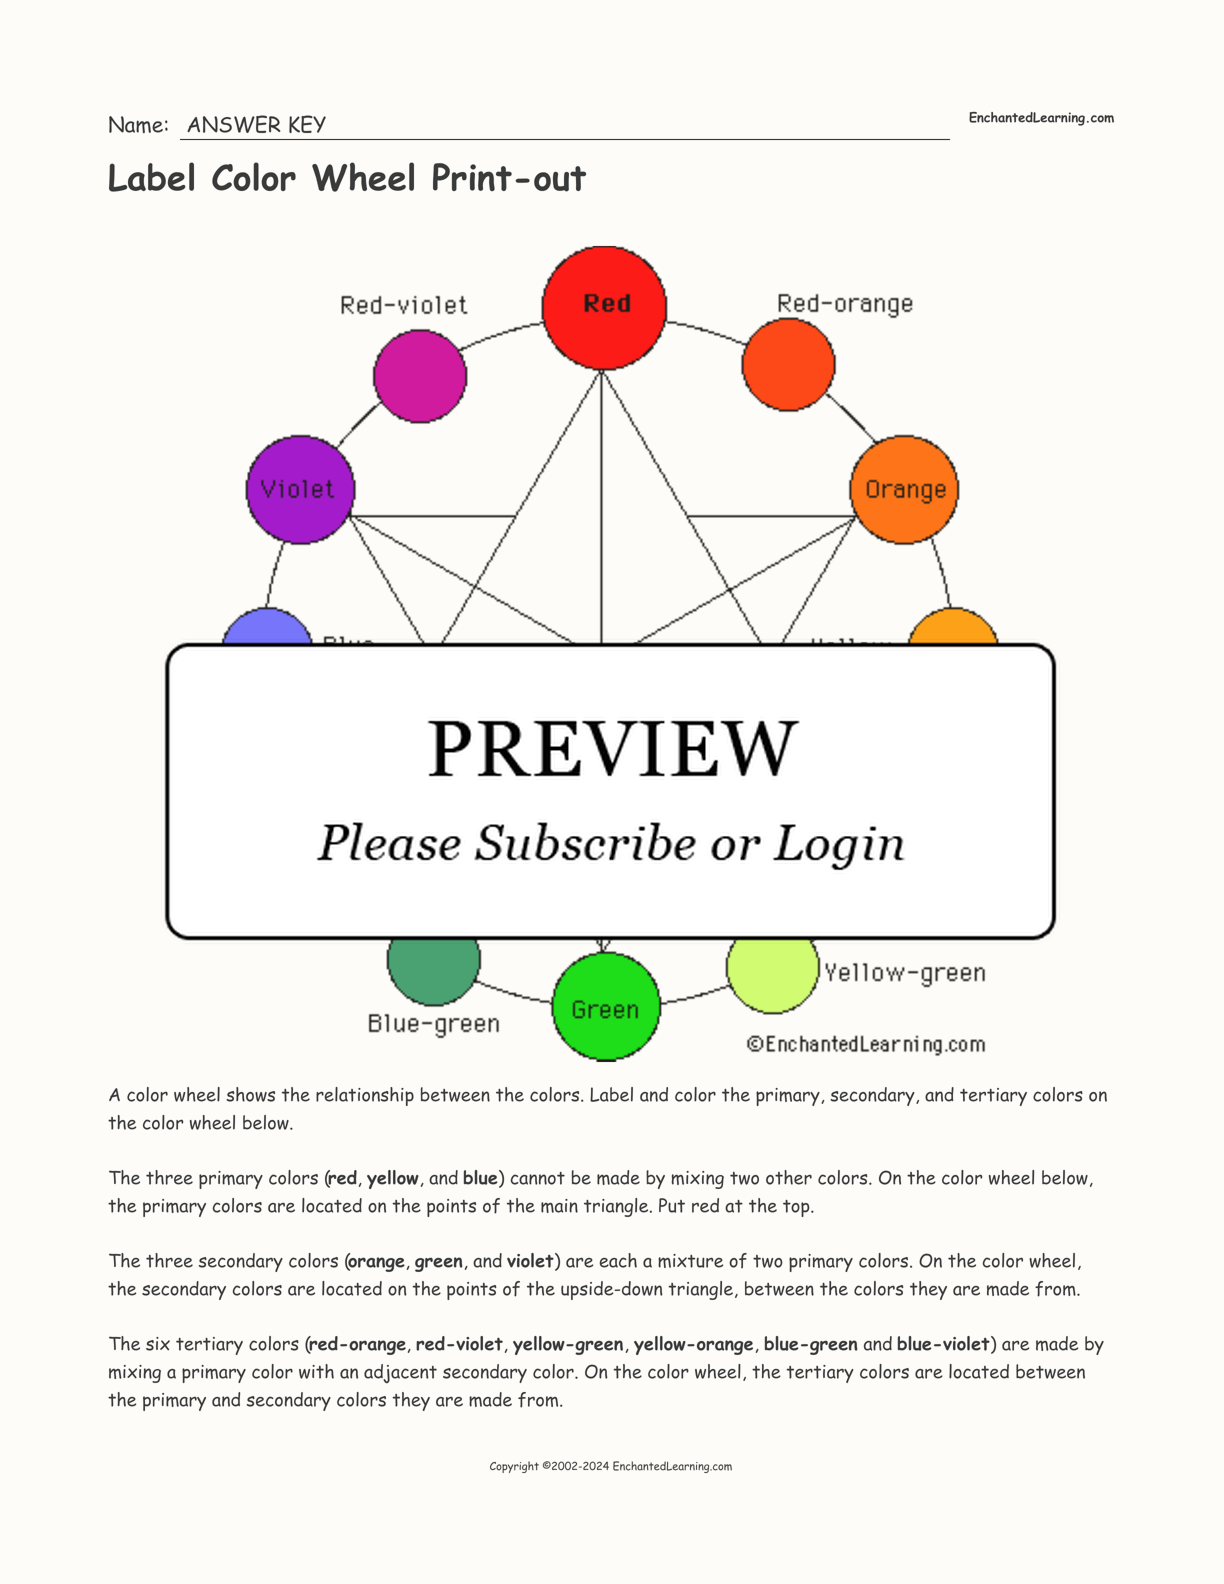 Label Color Wheel Print-out interactive worksheet page 2